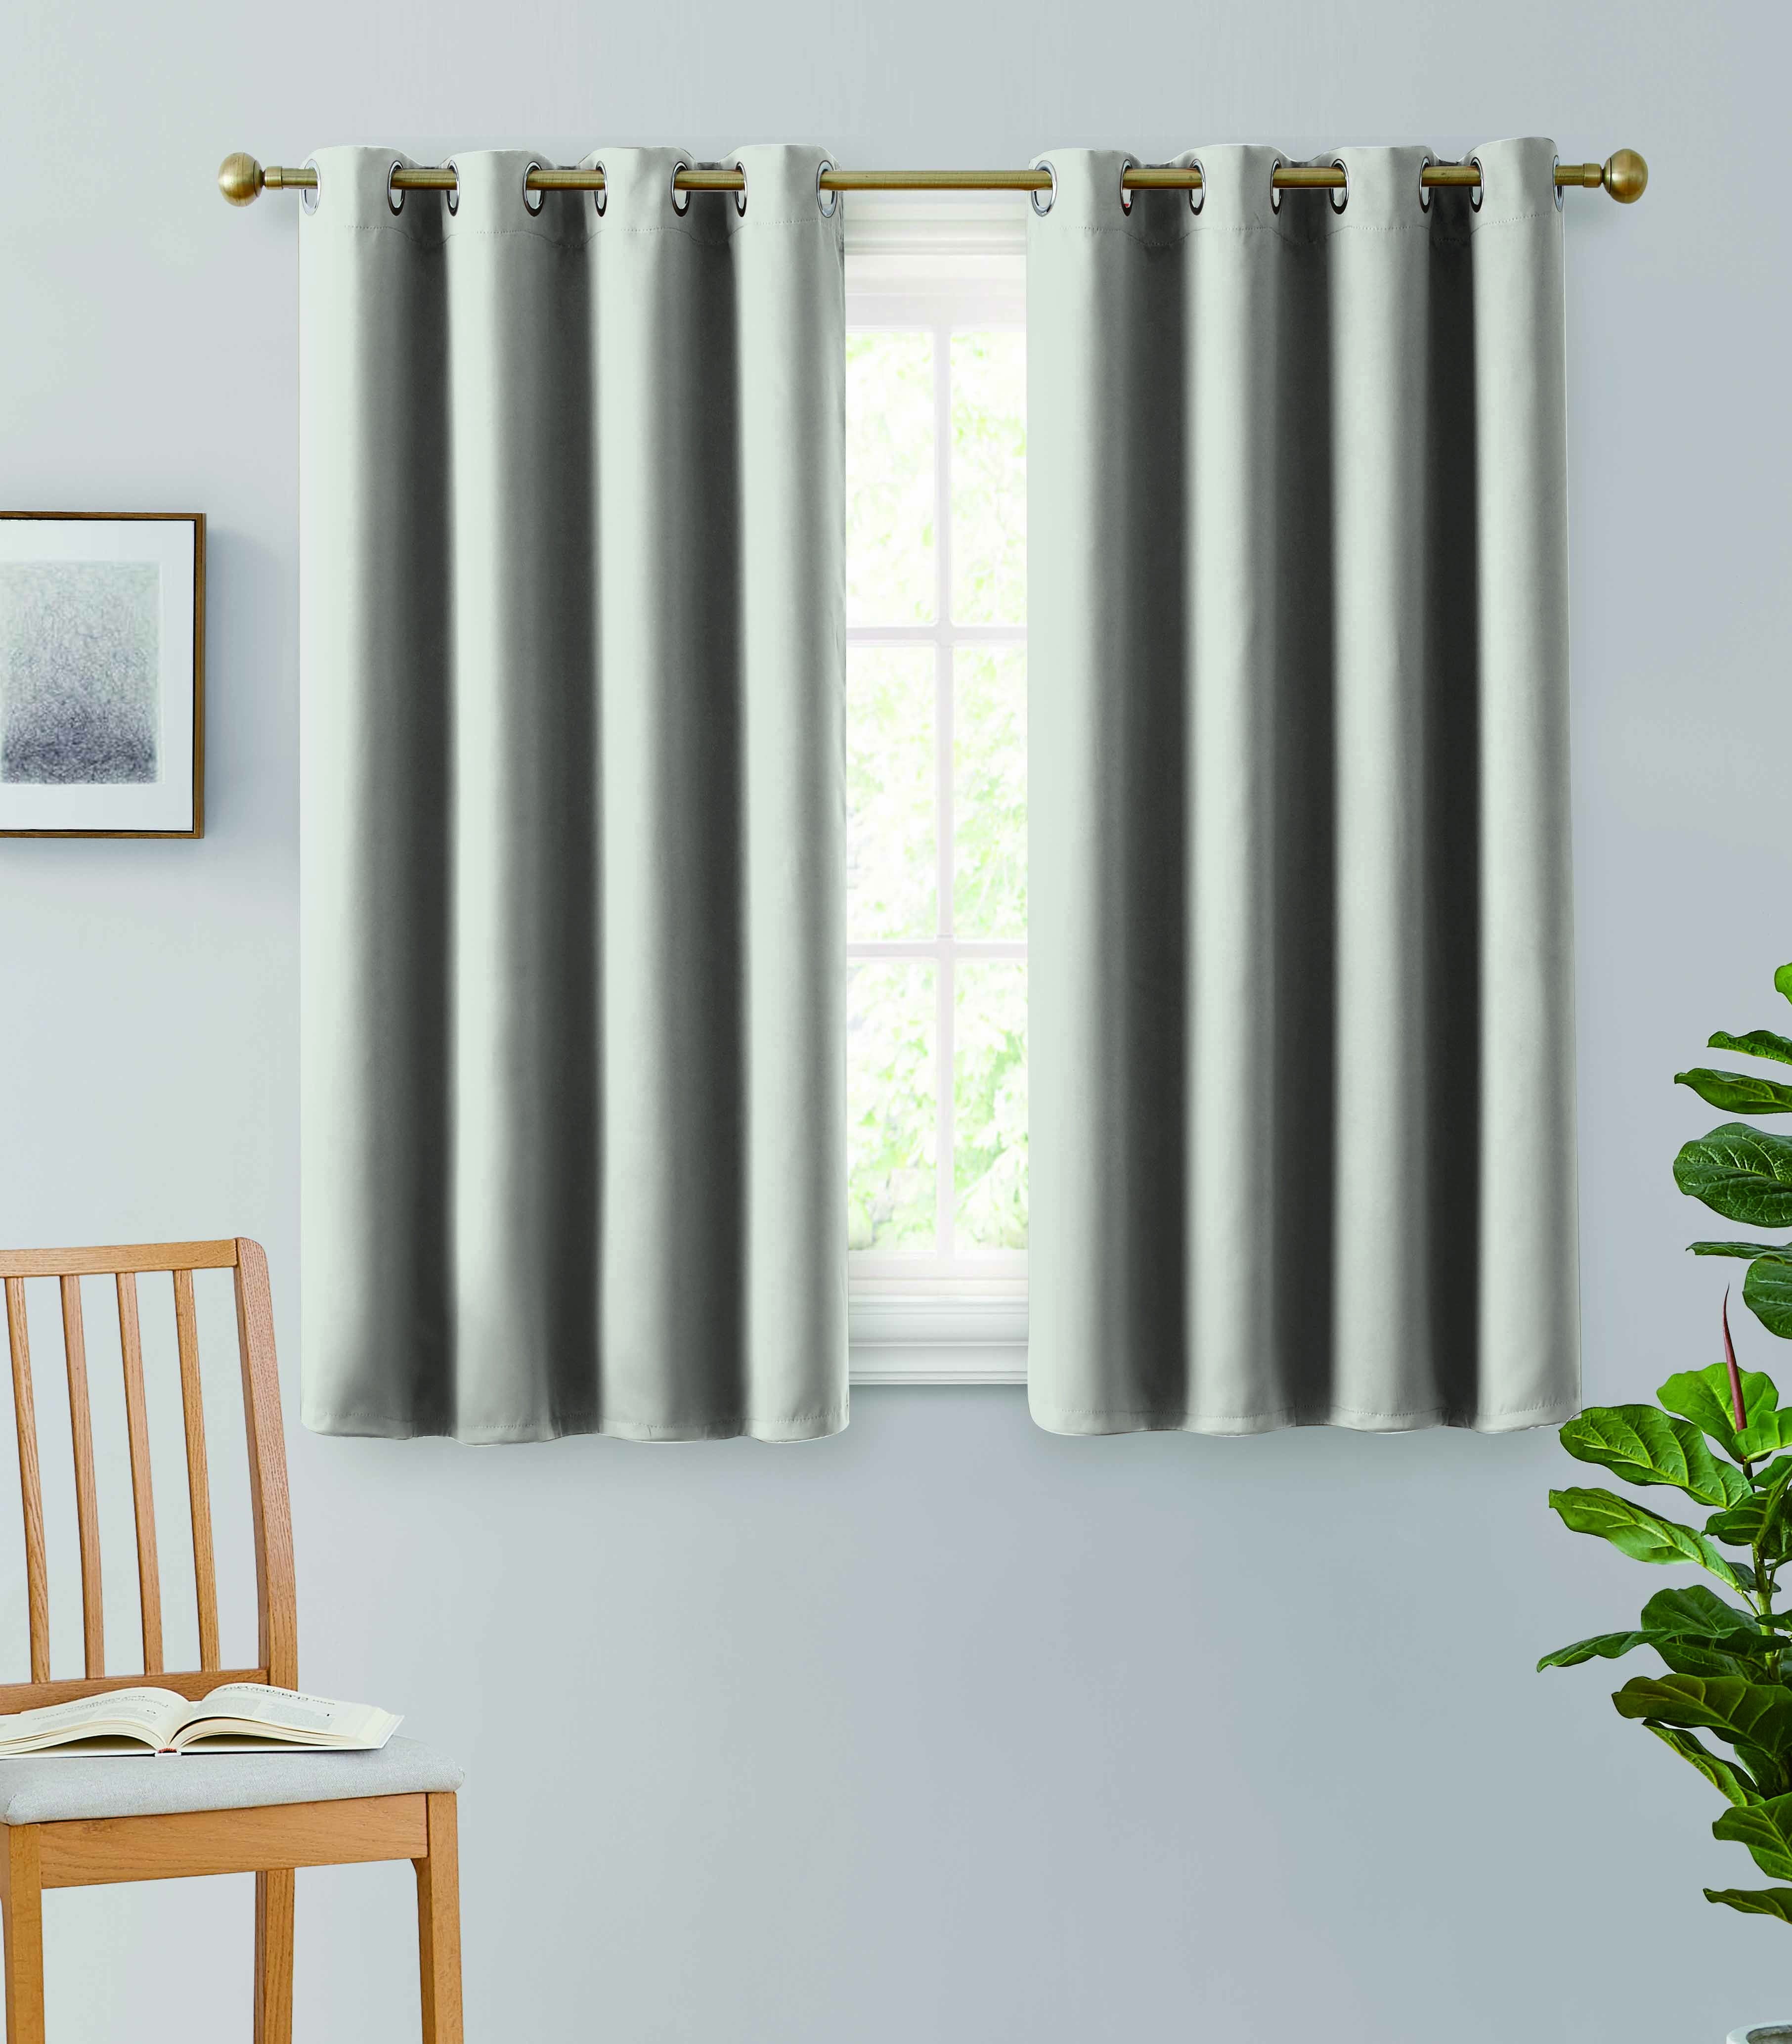 2 PANEL LIGHT BLUE LINED THERMAL BLACKOUT GROMMET WINDOW CURTAIN 55"X63" PC K60 